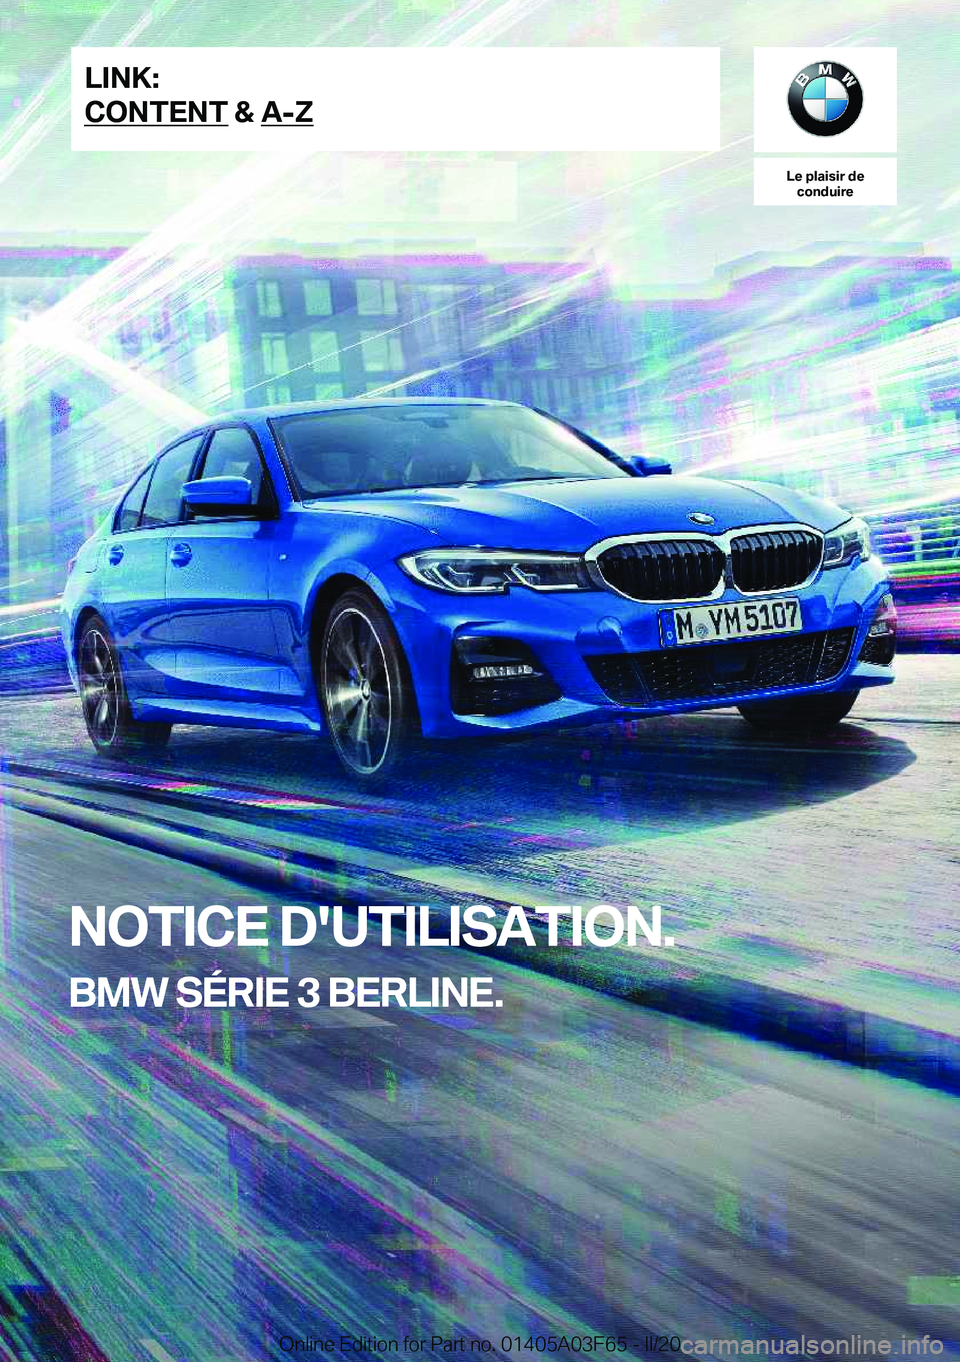 BMW 3 SERIES 2020  Notices Demploi (in French) �L�e��p�l�a�i�s�i�r��d�e�c�o�n�d�u�i�r�e
�N�O�T�I�C�E��D�'�U�T�I�L�I�S�A�T�I�O�N�.
�B�M�W��S�